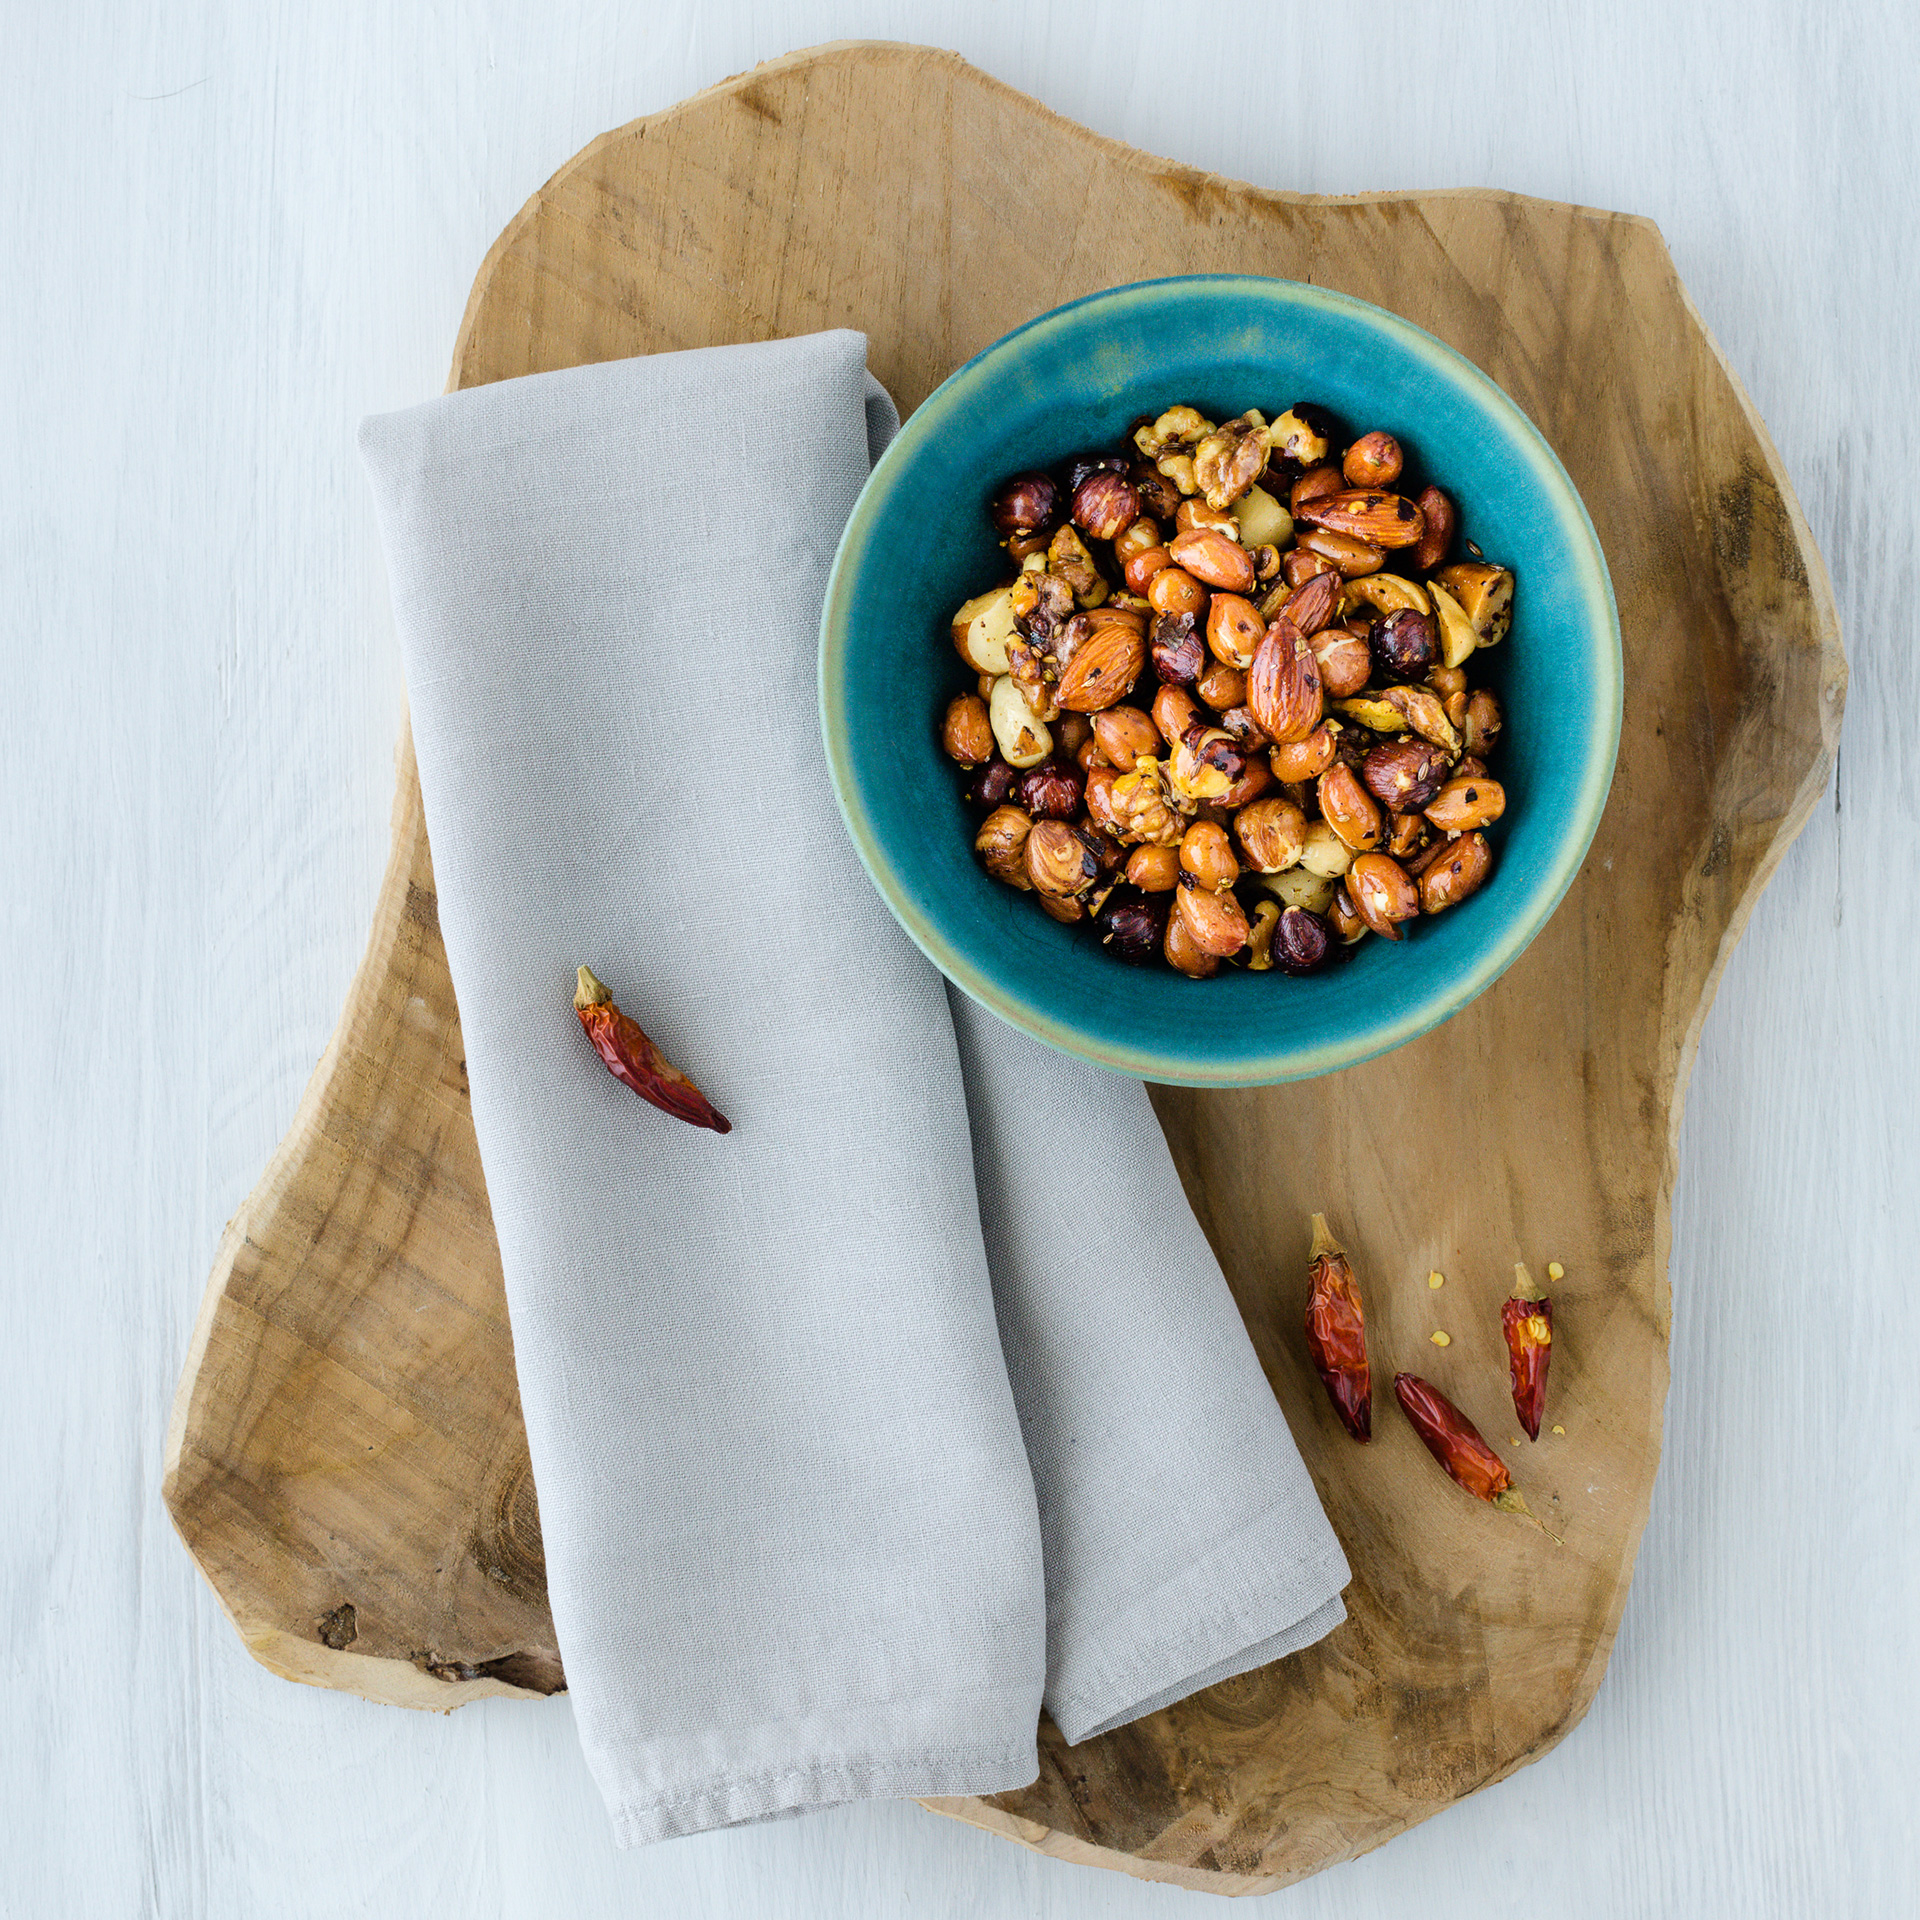 Jon Kempner - Food Photographer - Roasted Nuts with Chilli